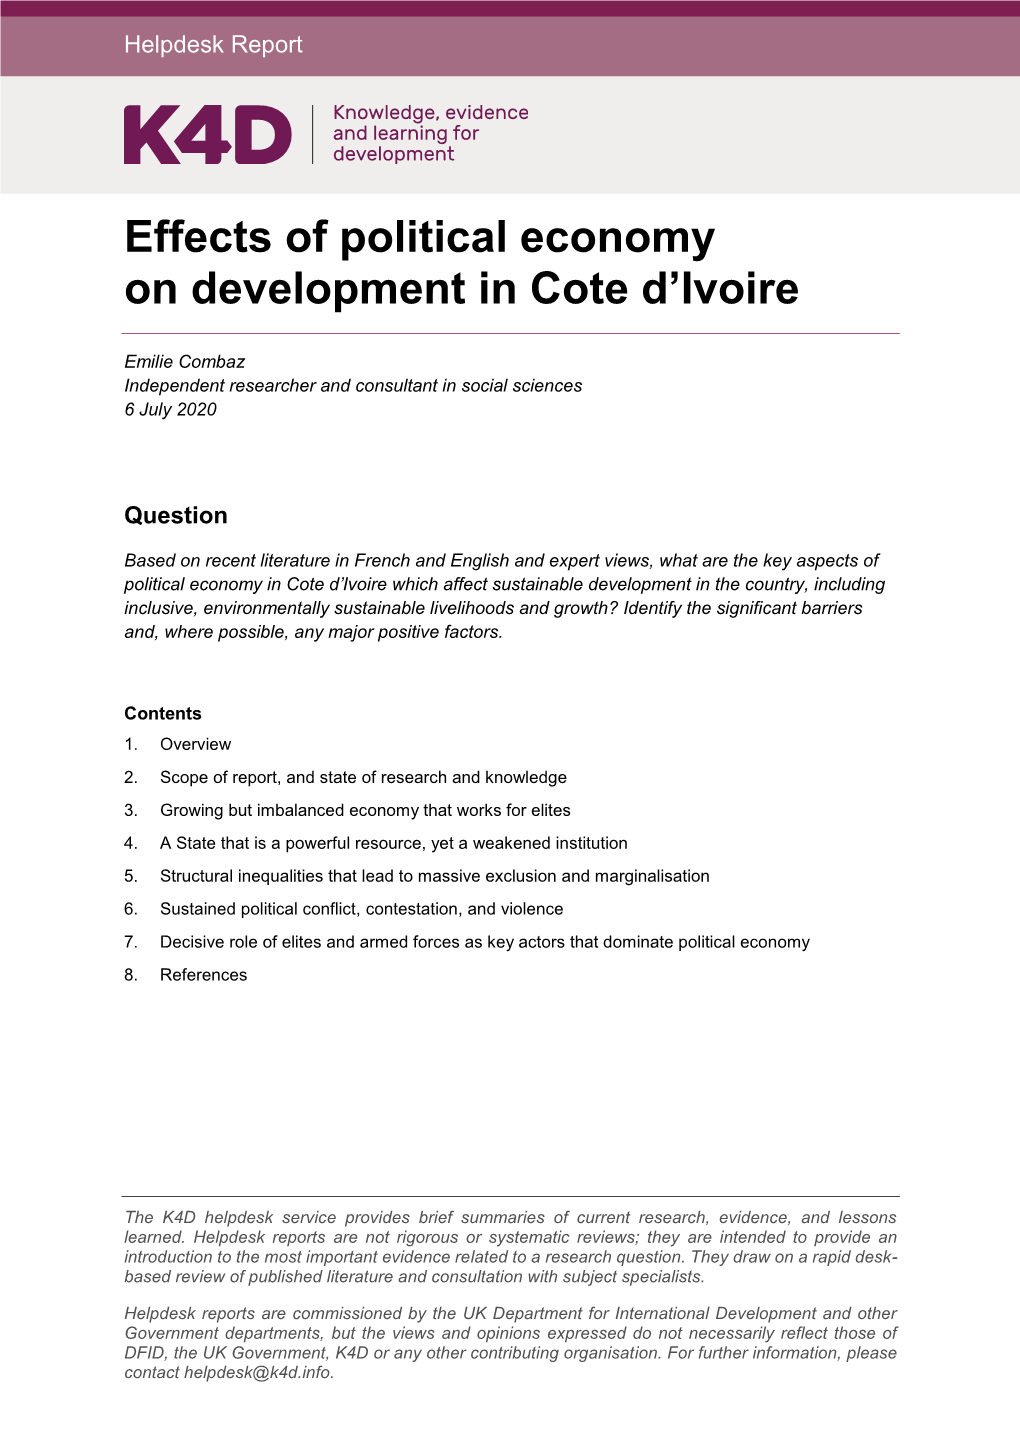 Effects of Political Economy on Development in Cote D'ivoire